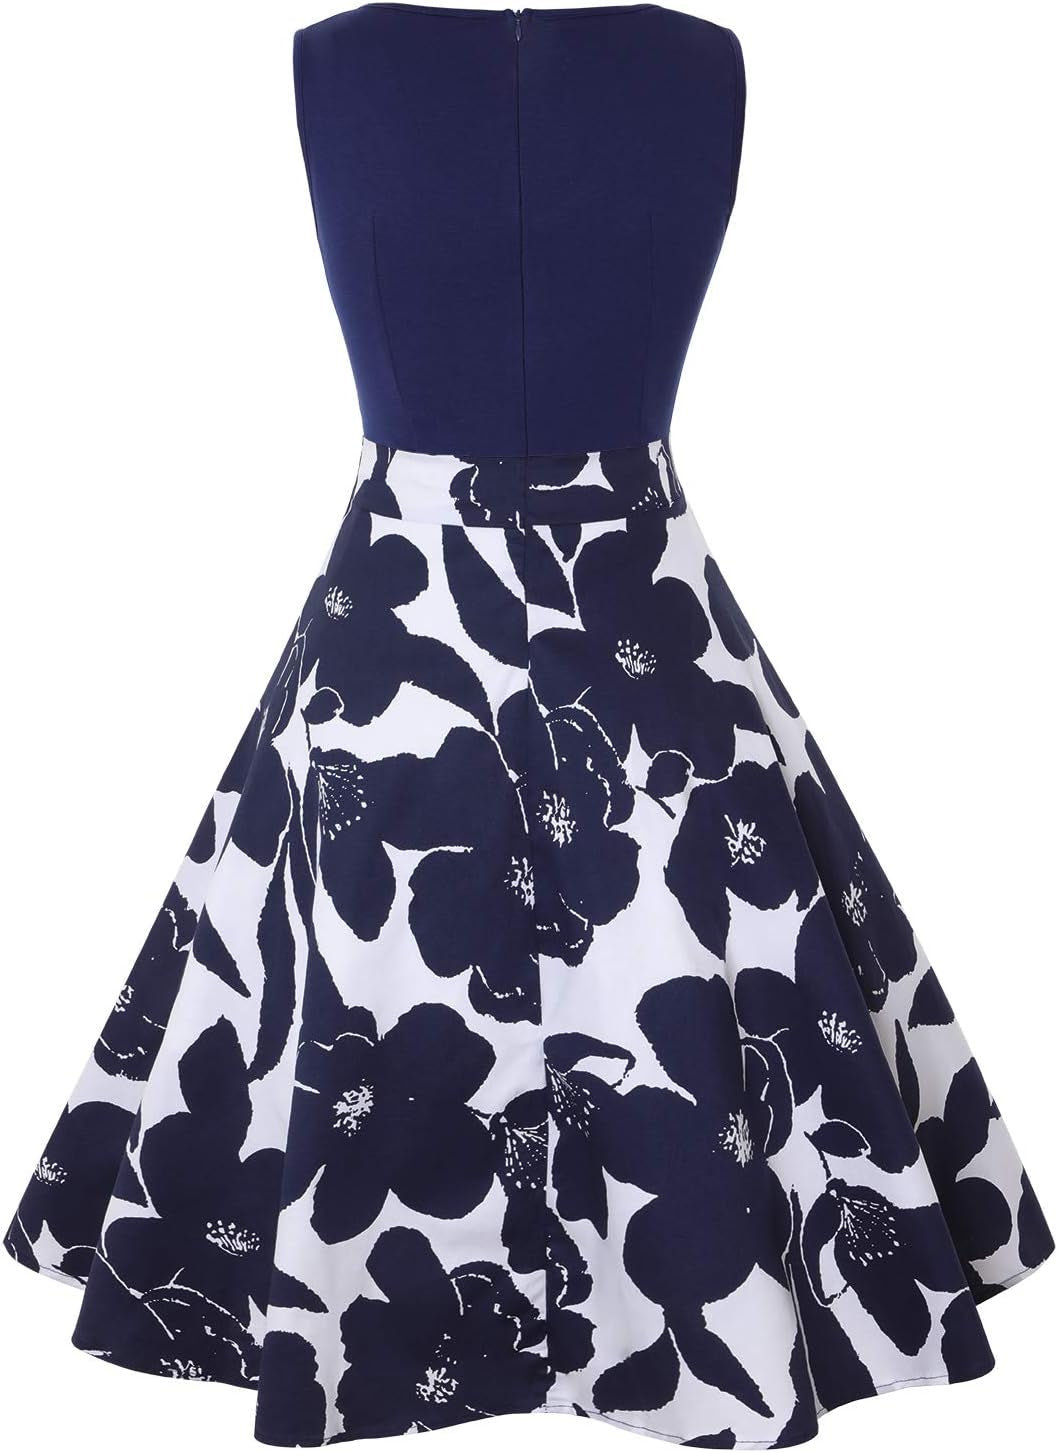 Women'S V Neck Sewing Floral Print Contrast Evening Prom a Line Dress (XXL, White Blue)